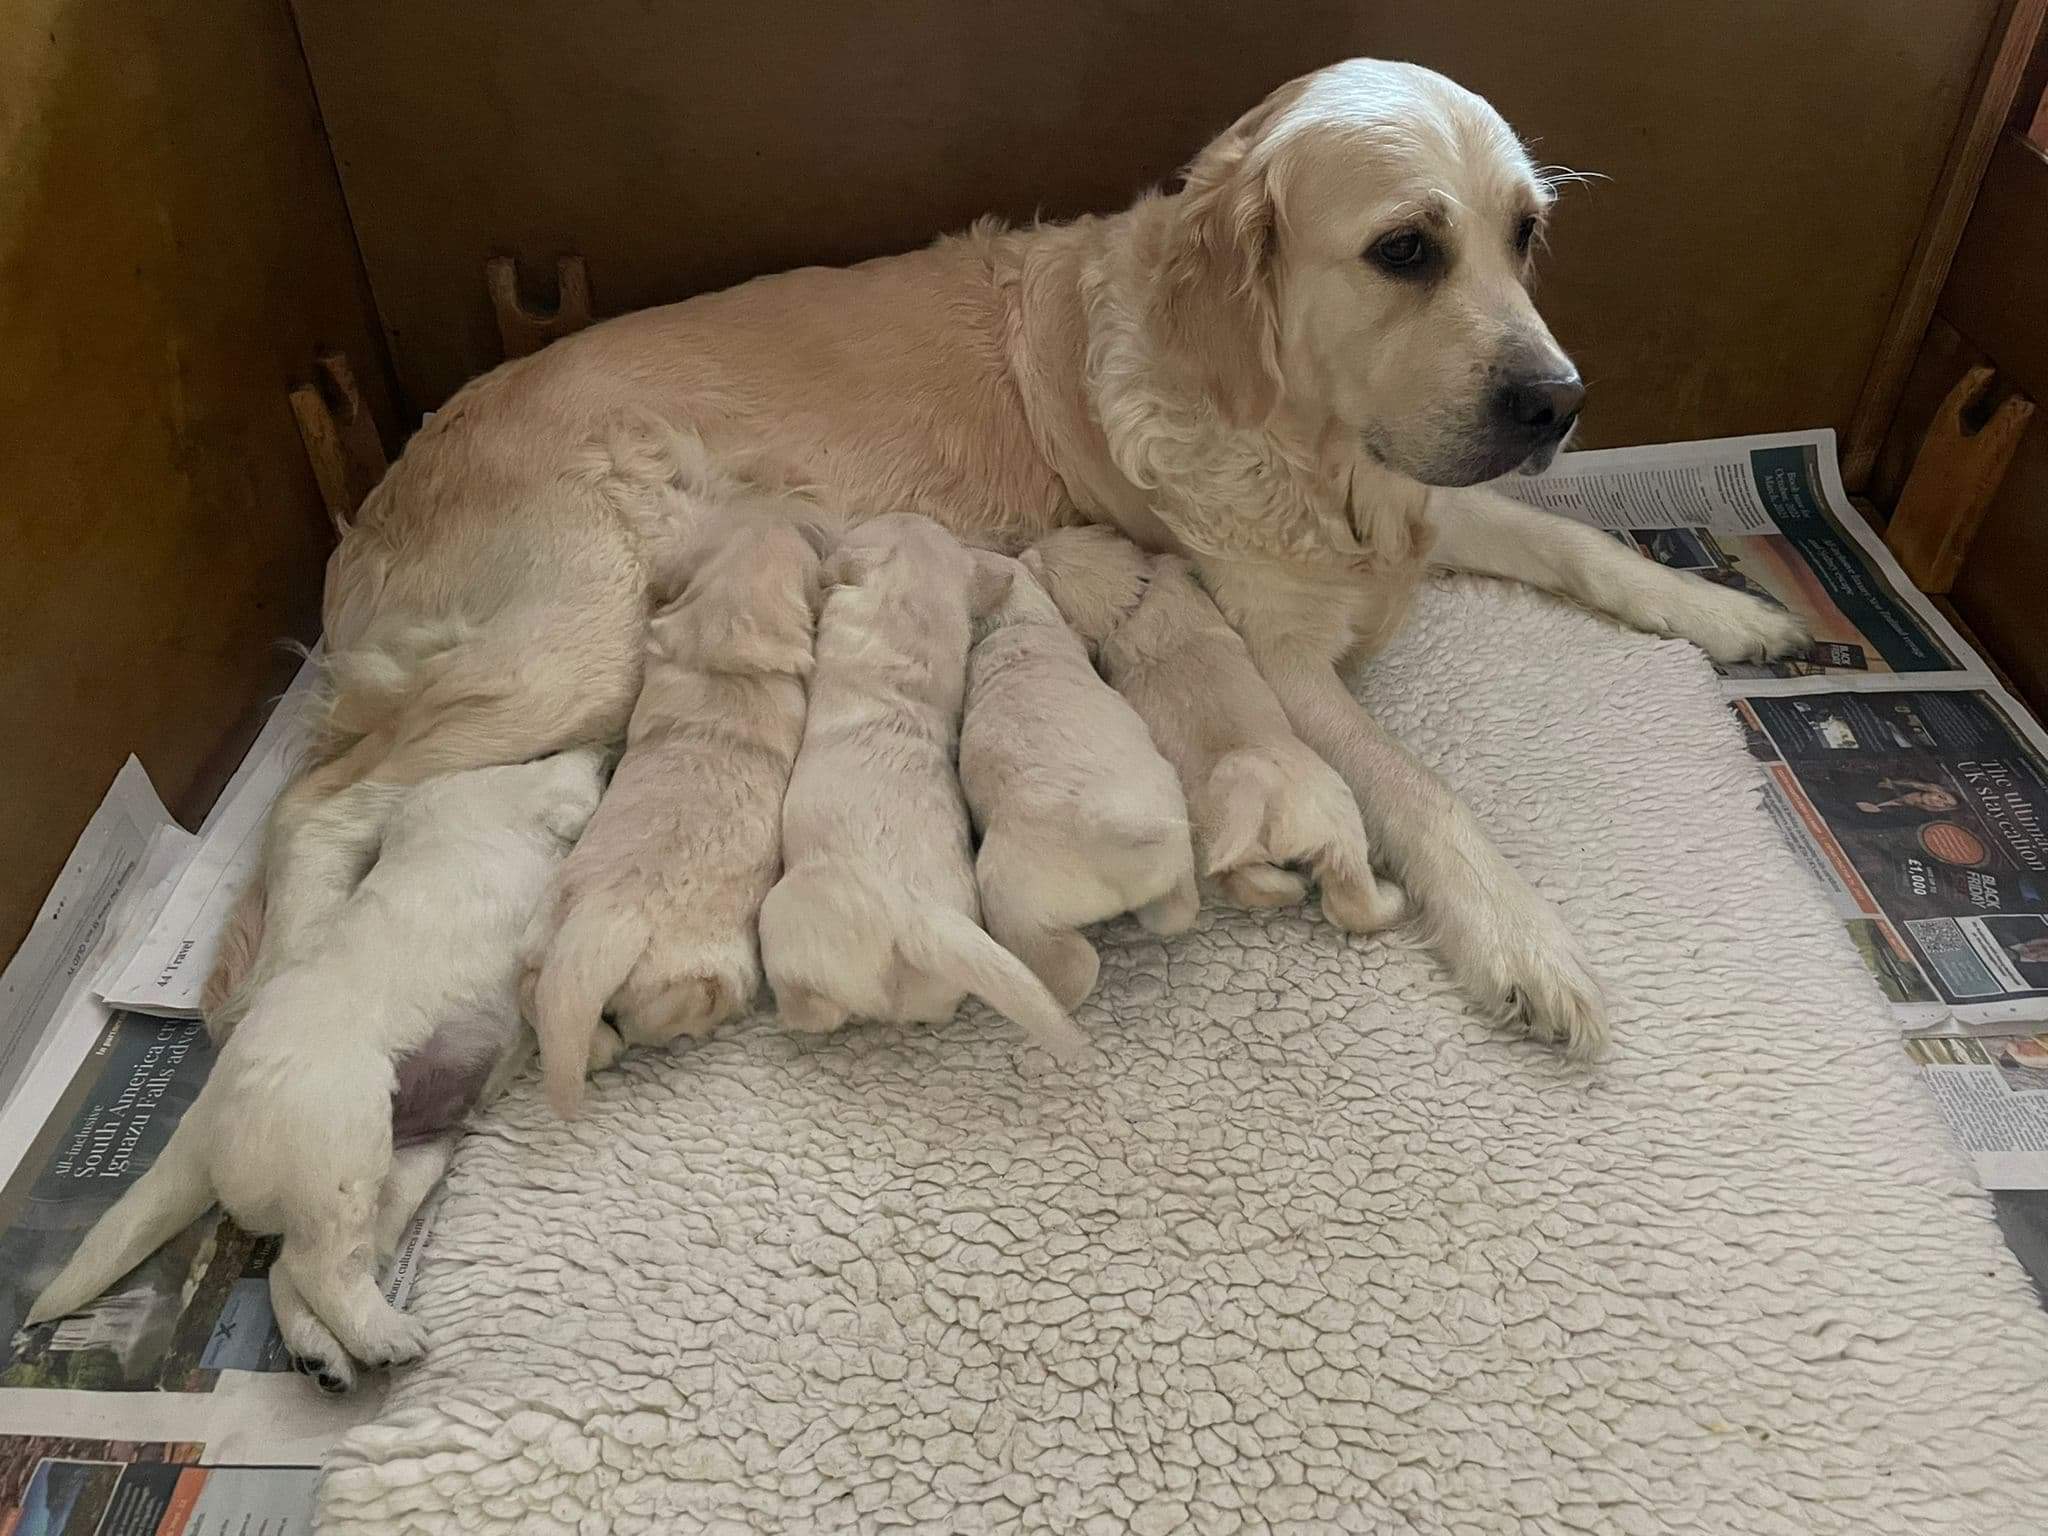 Ethel with puppies